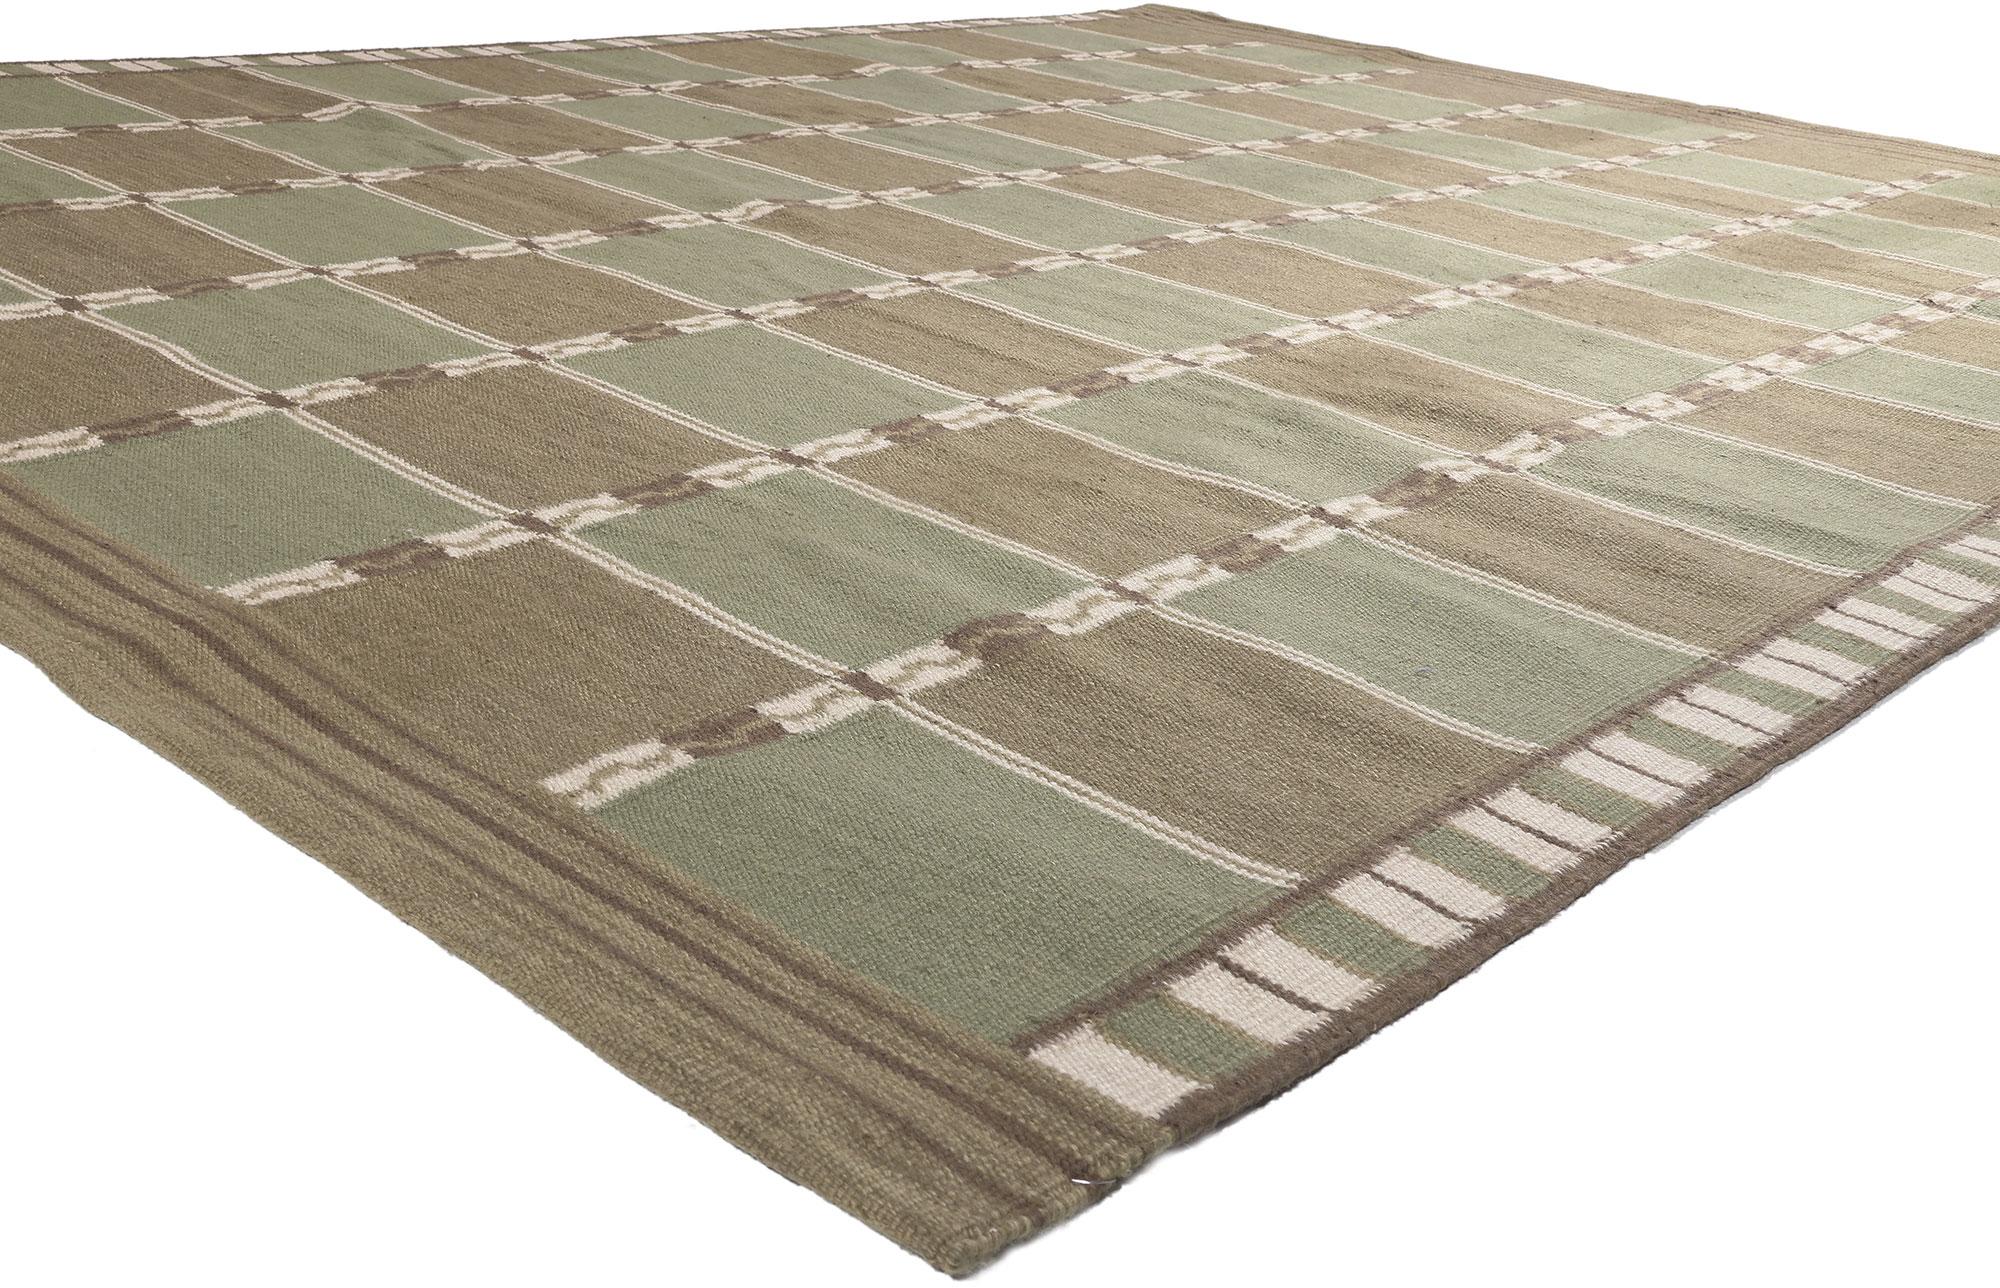 30942 New Swedish Inspired Kilim Rug, 09'02 x 11'10.
Displaying simplicity with incredible detail and texture, this handwoven wool Swedish inspired Kilim rug provides a feeling of cozy contentment without the clutter. The eye-catching checked design